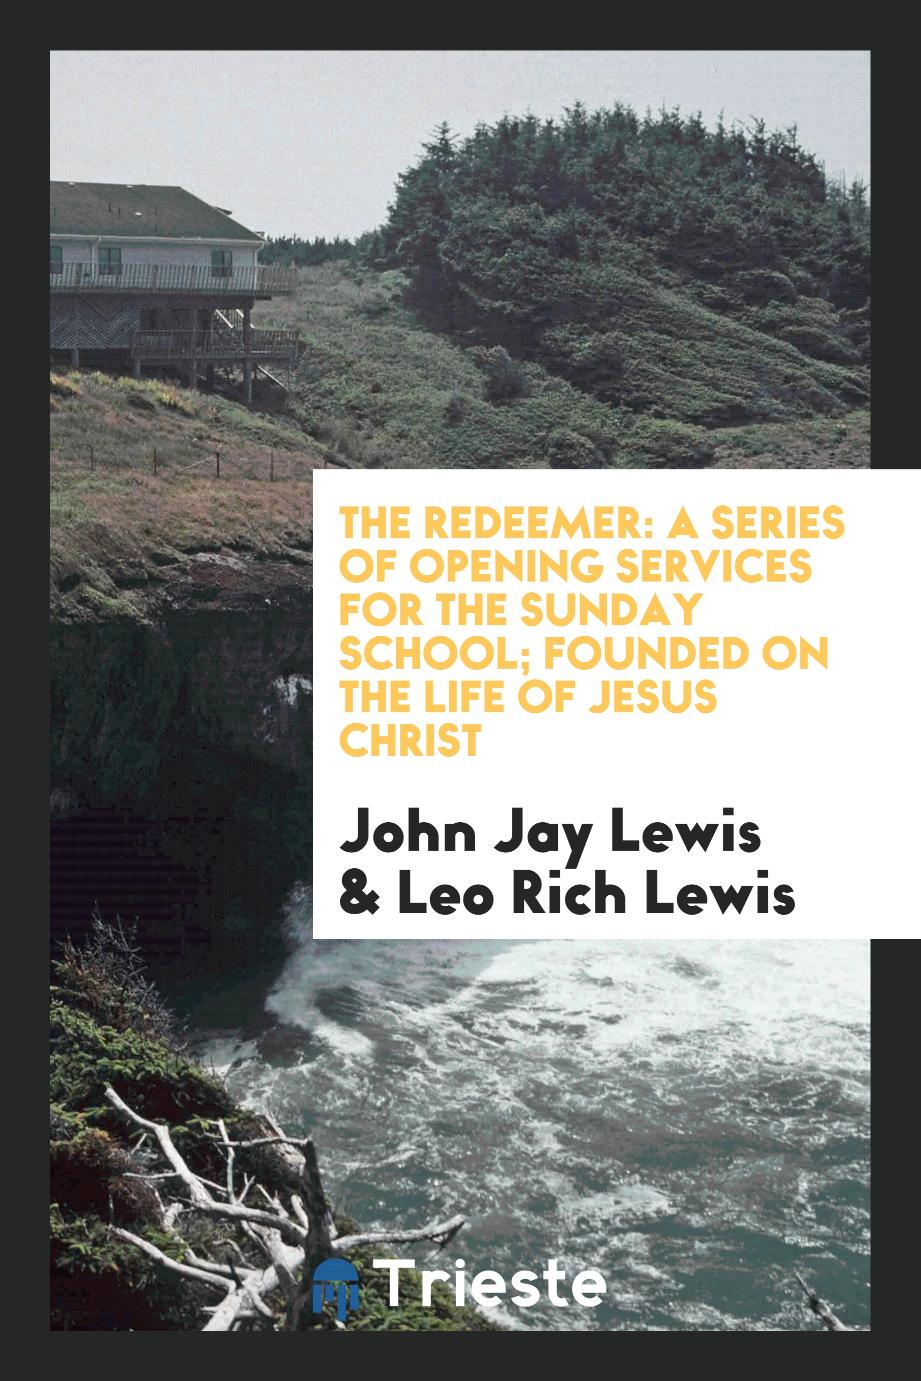 The Redeemer: A Series of Opening Services for the Sunday School; Founded on the Life of Jesus Christ